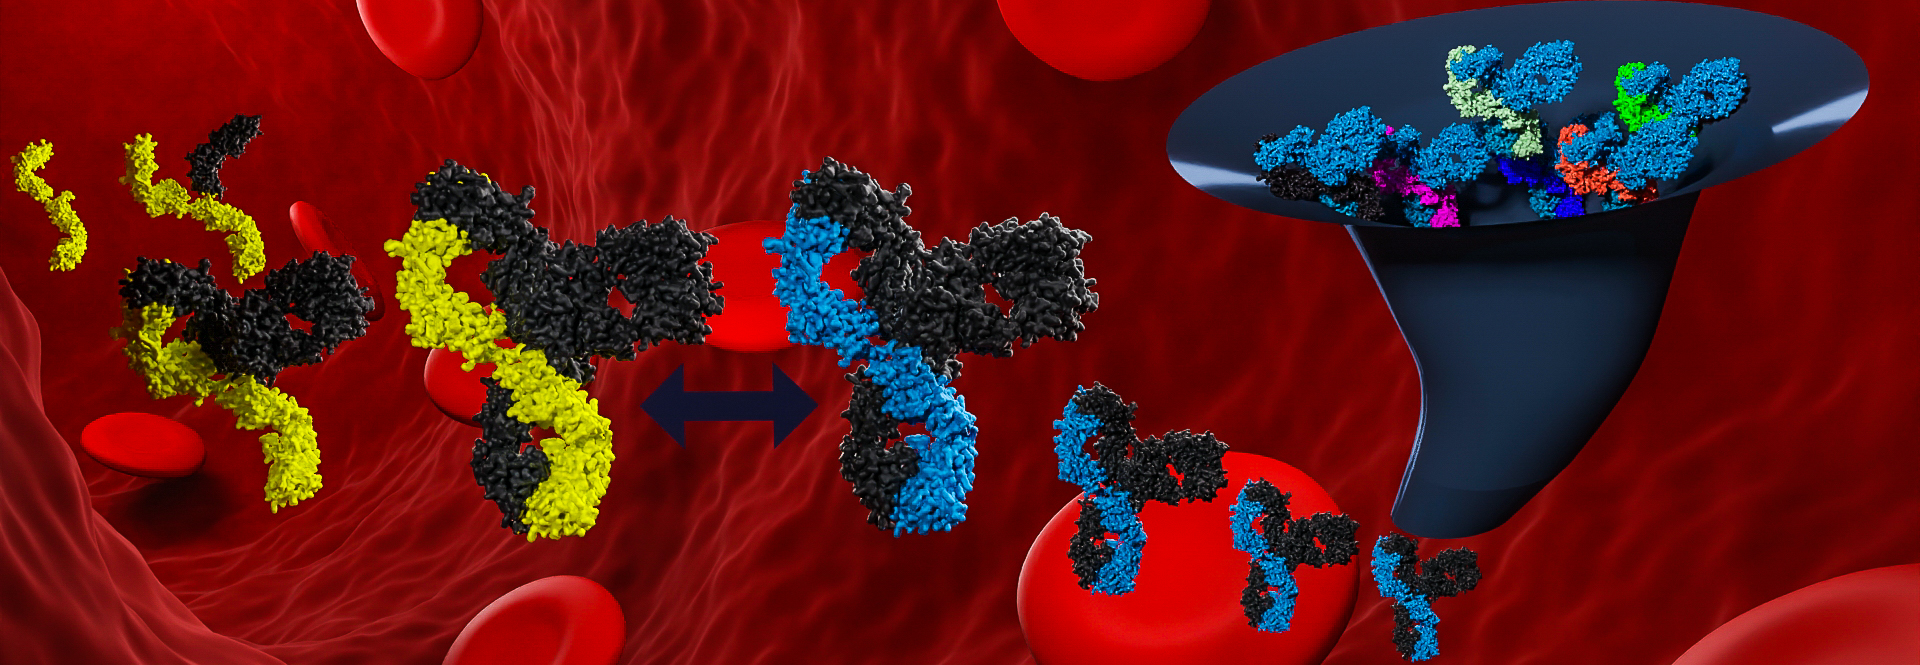 3d render of igG antibodies falling throug a funnel and getting degradated in a red blood vessel scene generated by Biofidus AG